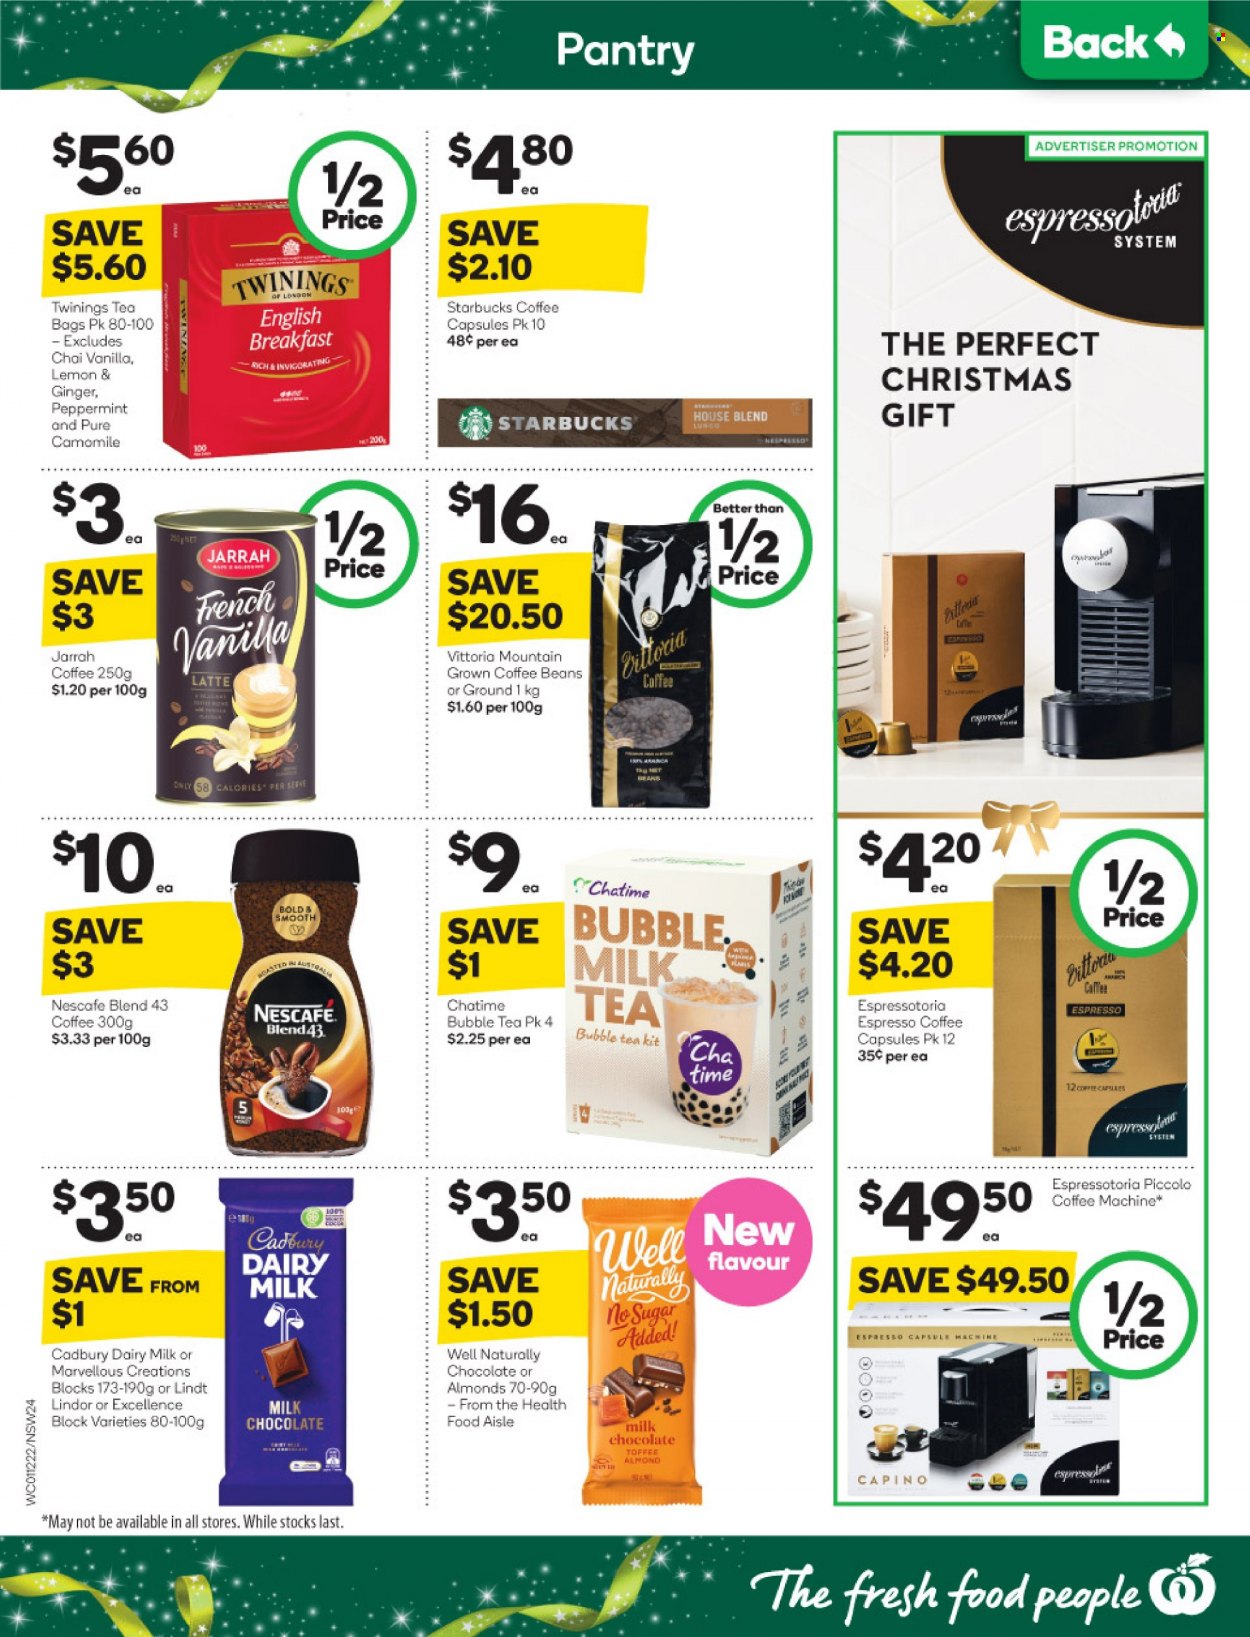 thumbnail - Woolworths Catalogue - 1 Dec 2021 - 7 Dec 2021 - Sales products - ginger, milk chocolate, chocolate, Lindt, Lindor, toffee, Cadbury, Dairy Milk, sugar, almonds, tea bags, Twinings, bubble tea, coffee beans, Nescafé, espressotoria capsules, coffee capsules, Starbucks, coffee machine. Page 24.